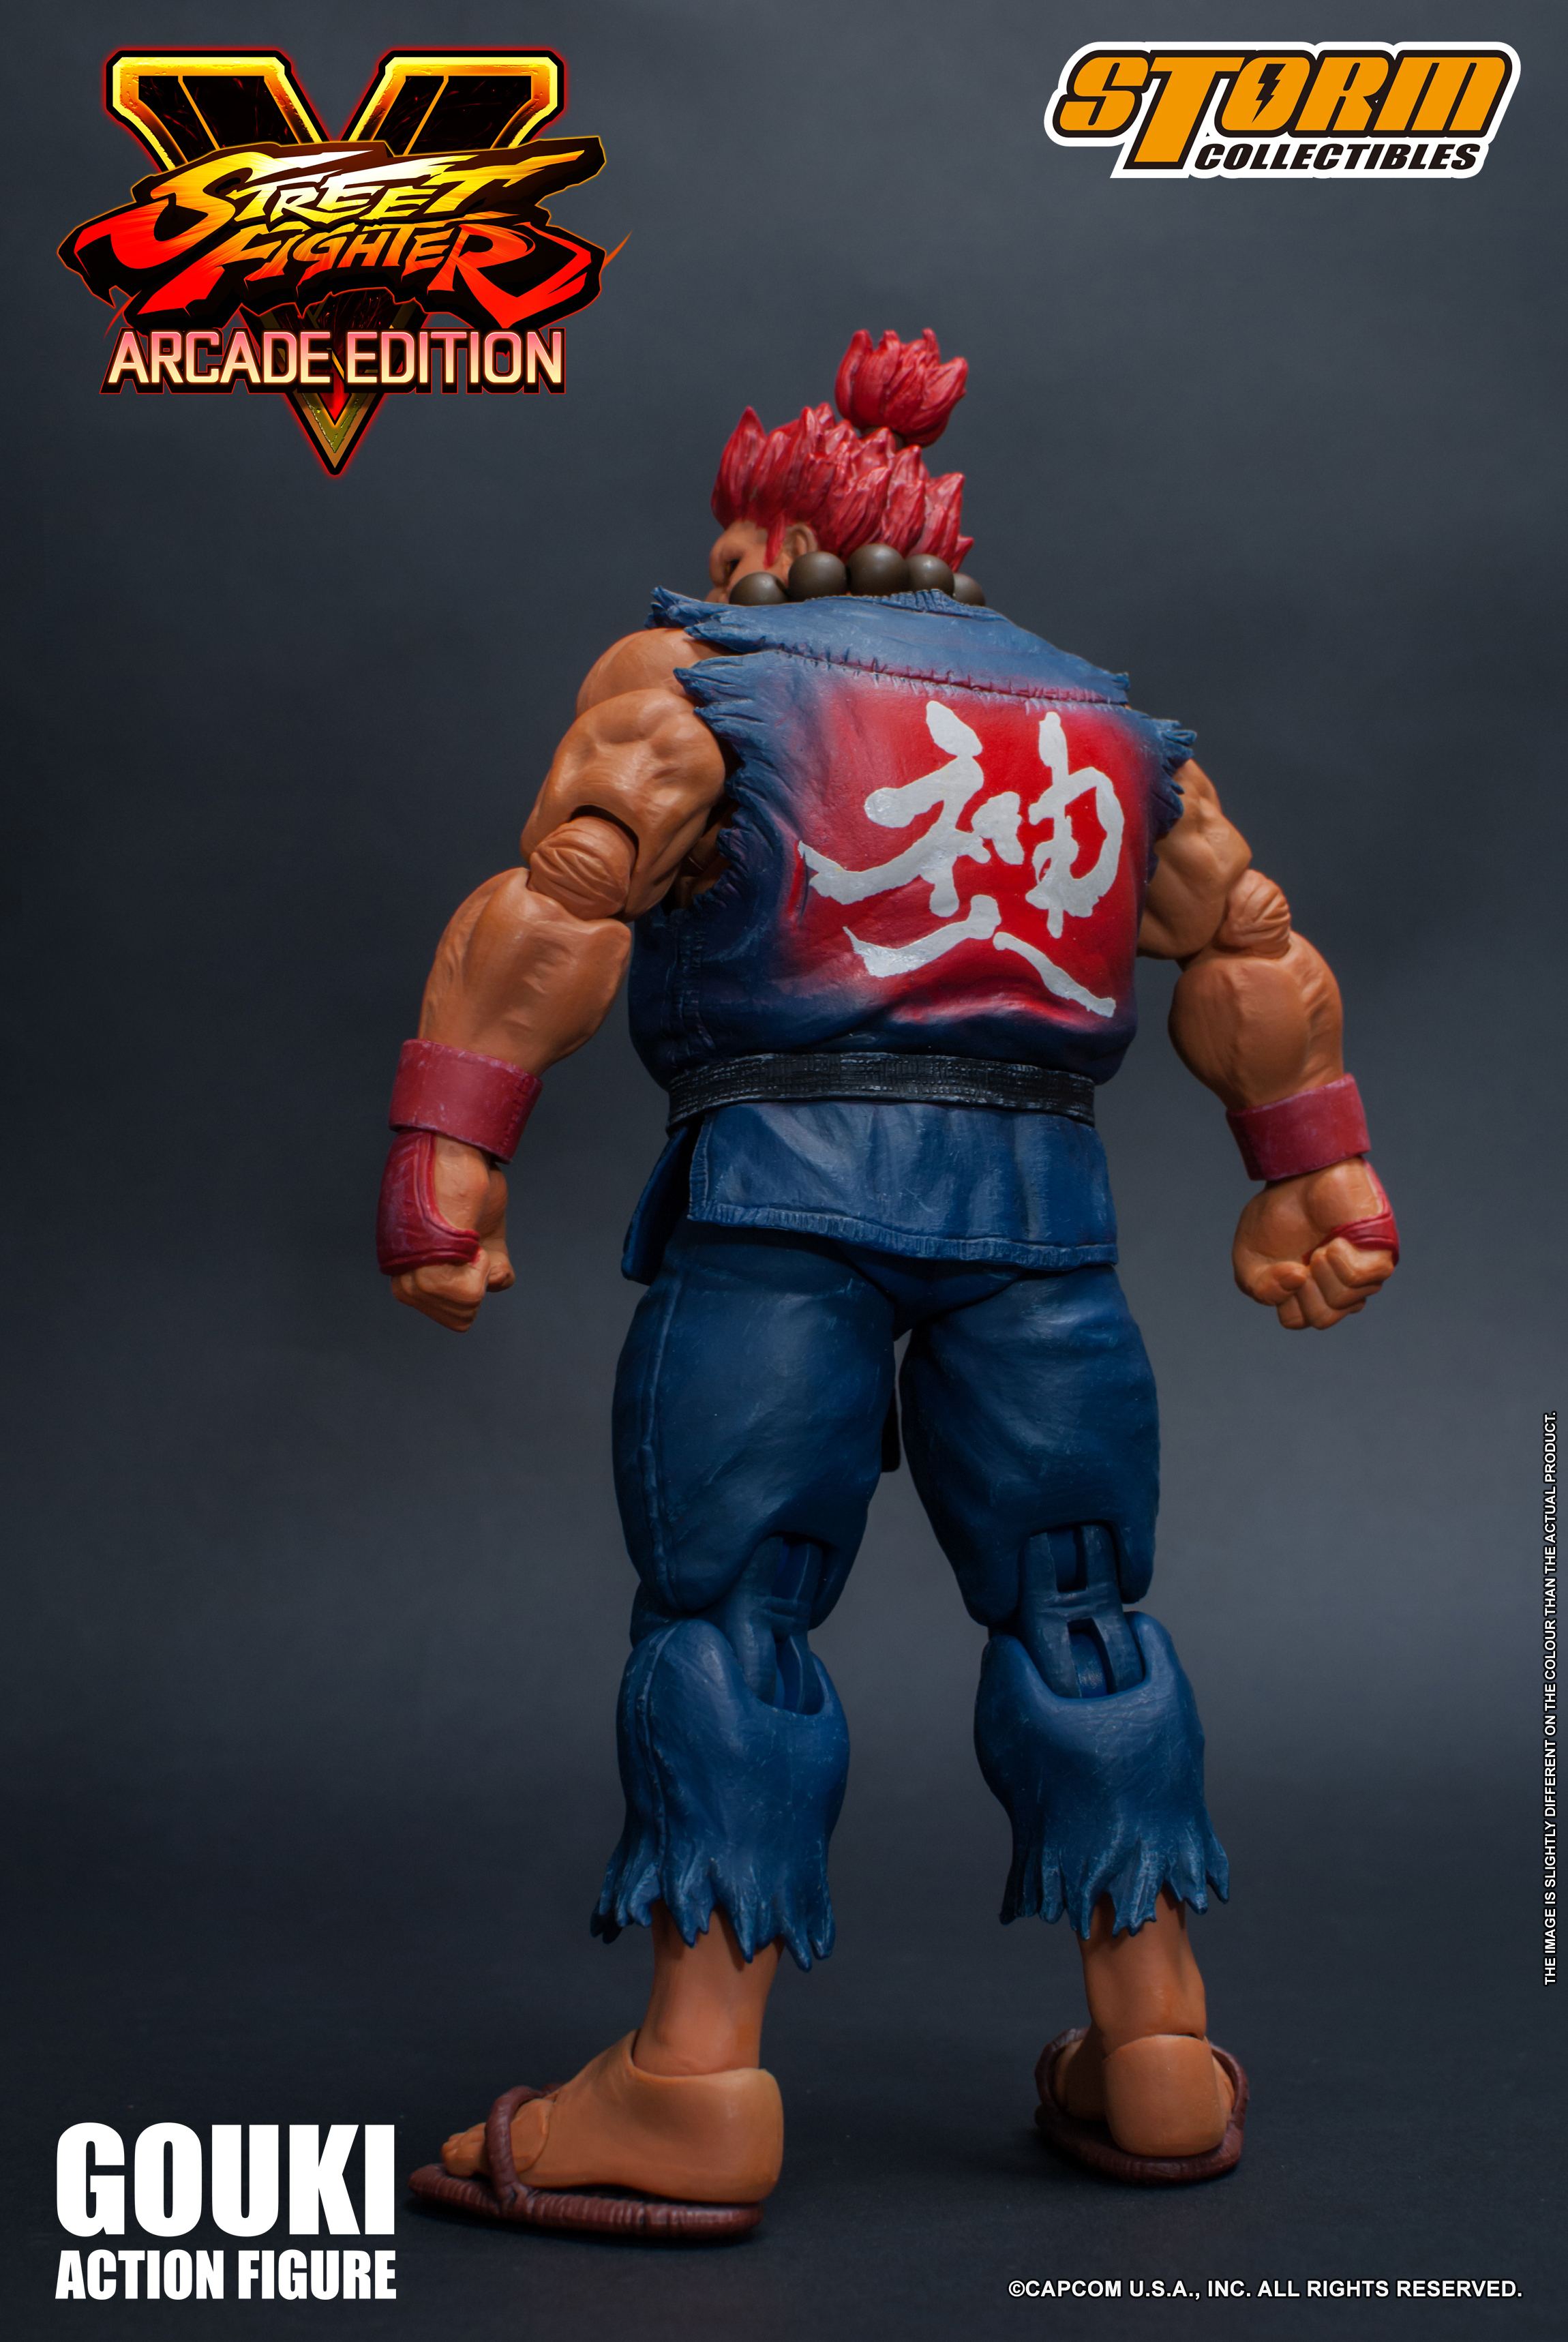 STREET FIGHTER V 1/12 SCALE PRE-PAINTED ACTION FIGURE: GOUKI NOSTALGIA COSTUME VER. Storm Collectibles